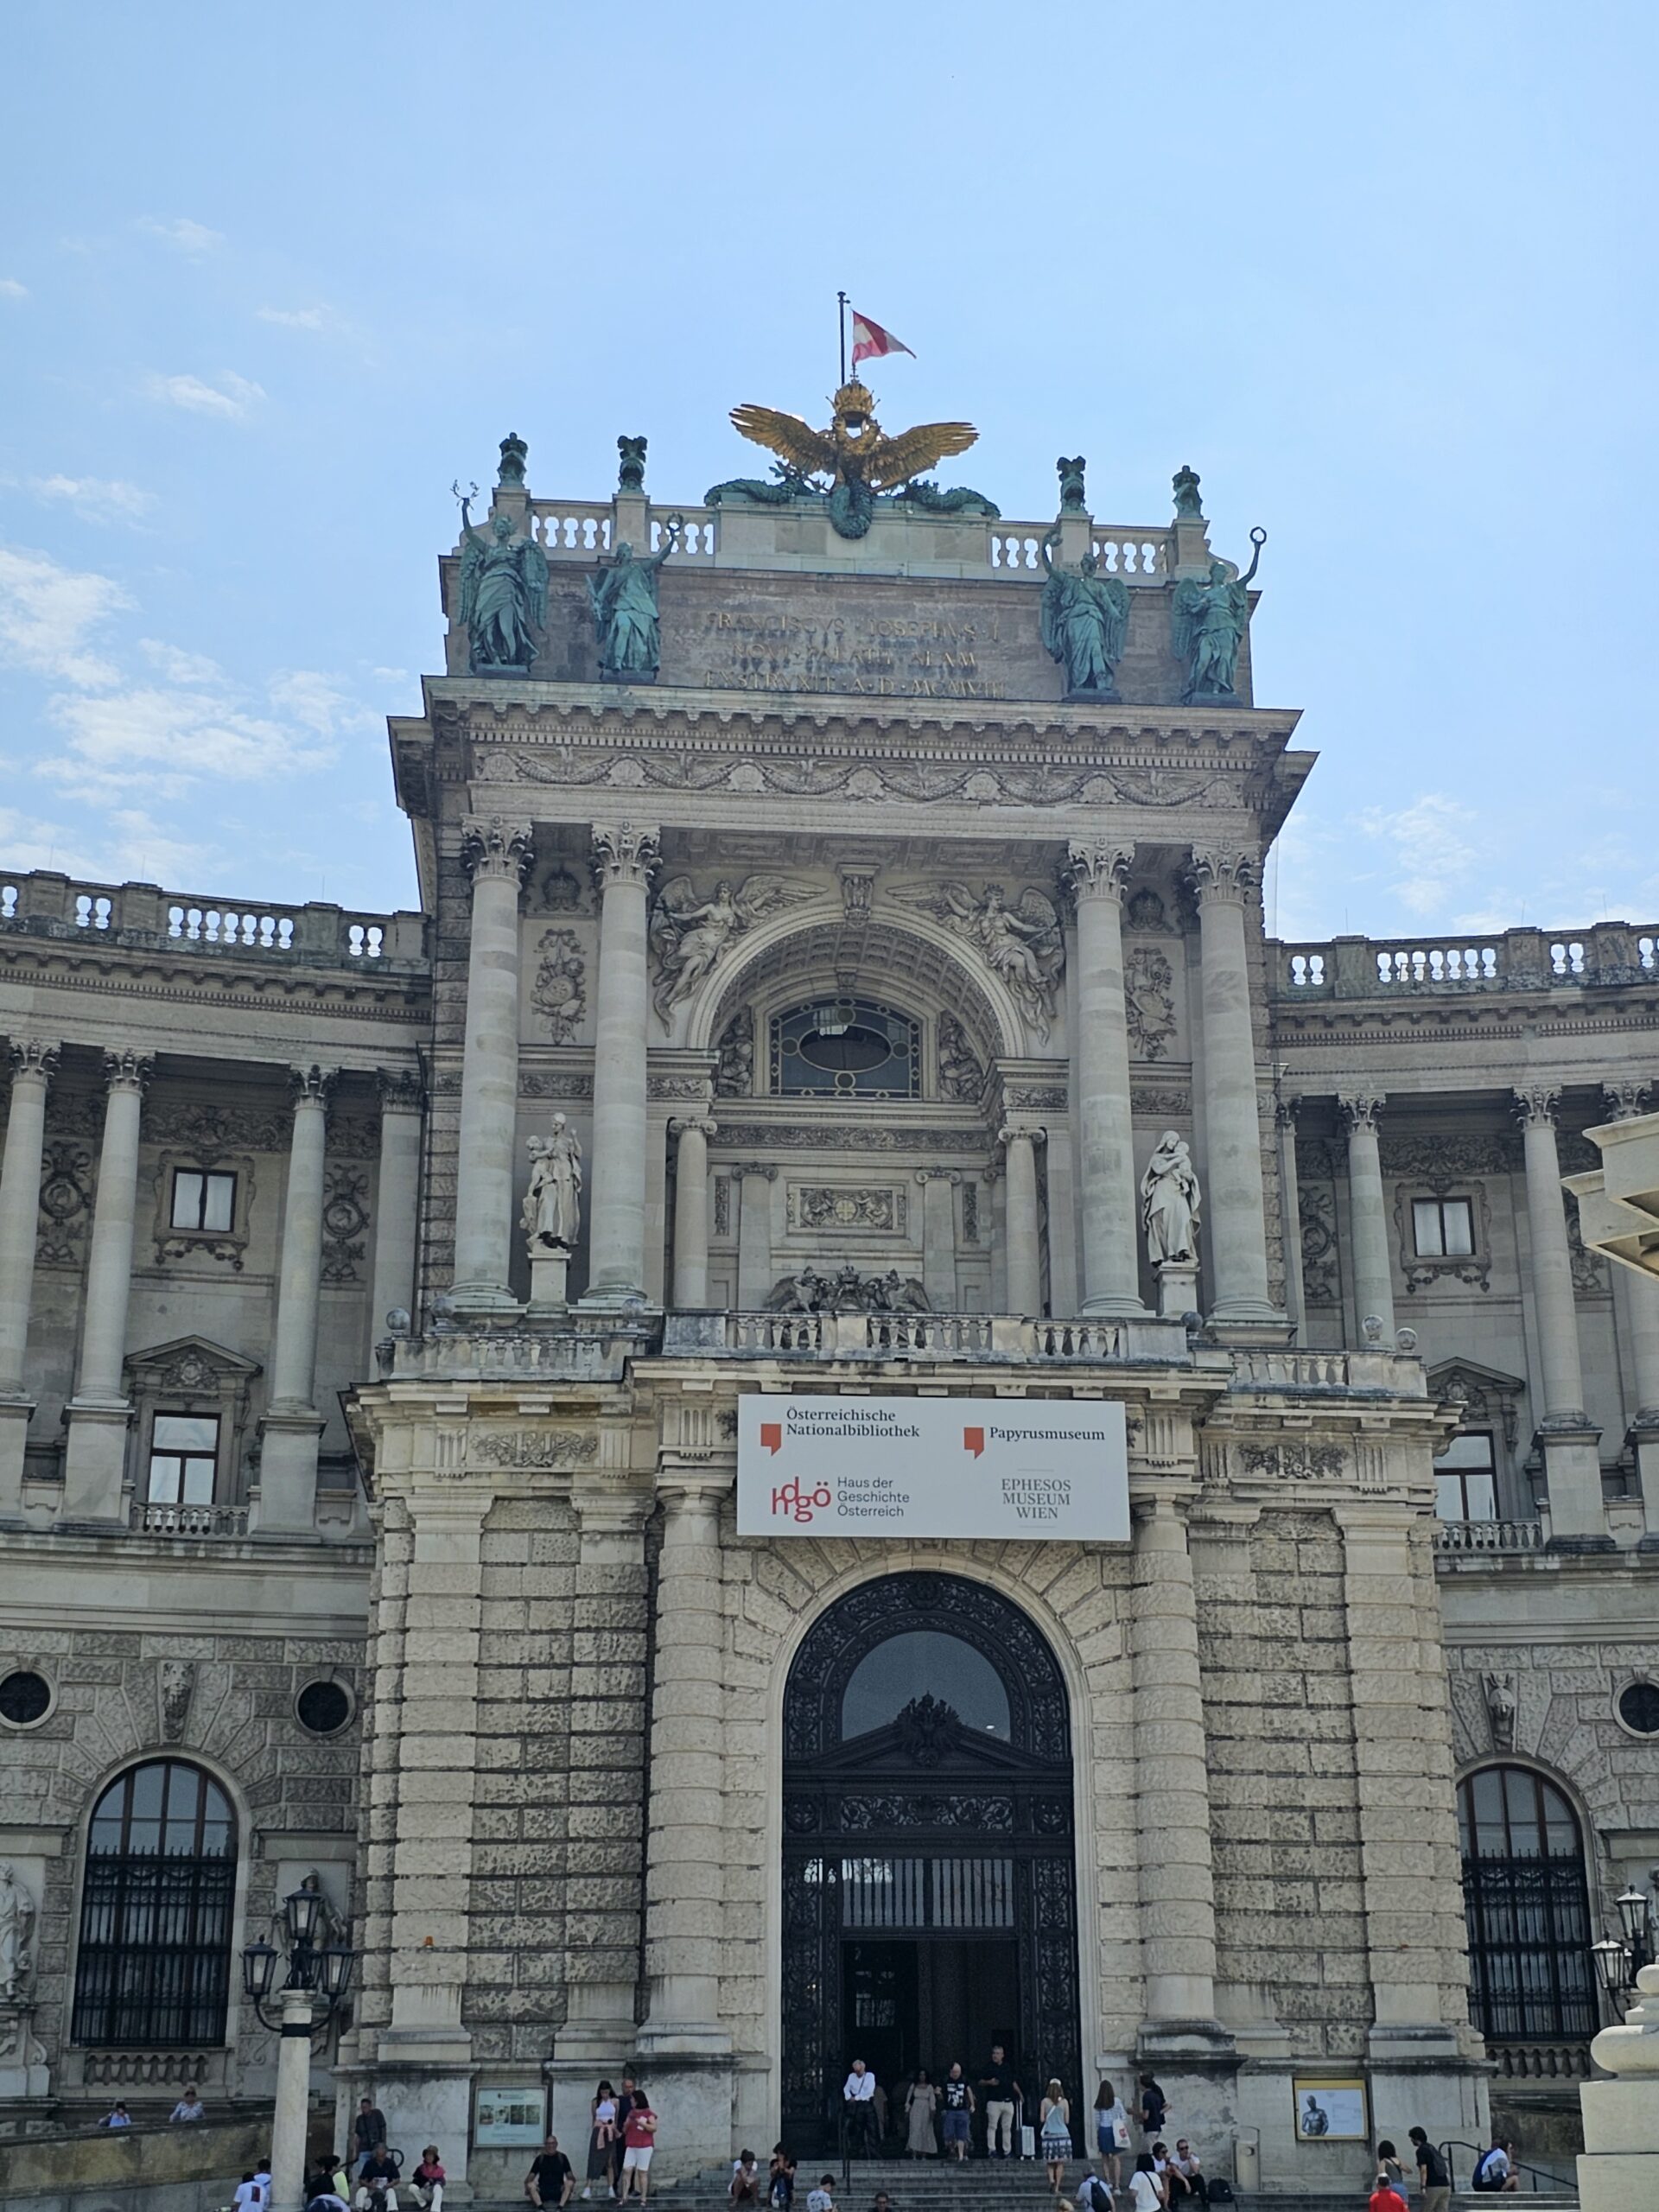 Front facade of Hofburg Palace. The door is surrounded by columns with green statues at the top. The roof has a golden eagle with wings spread. Image by 360onhistory.com